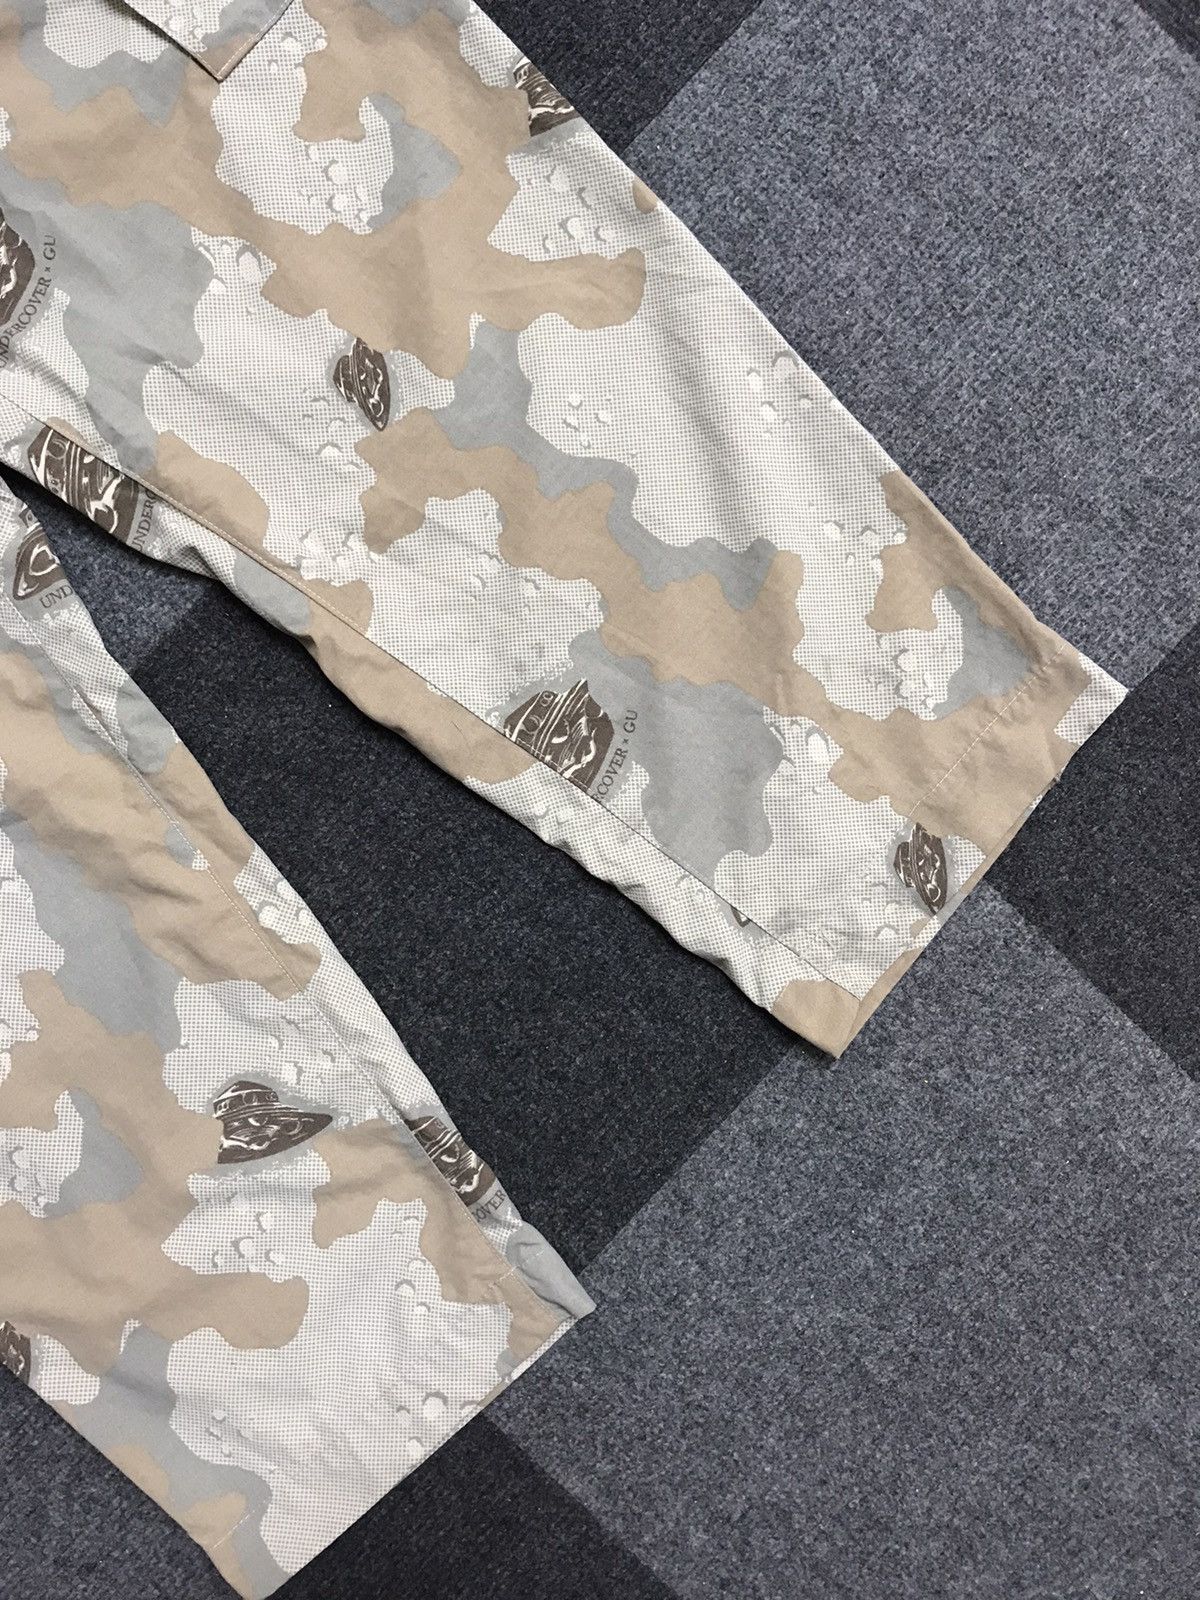 UNDERCOVER X GU Hype Beast Style Camo Multipockets Pant - 4